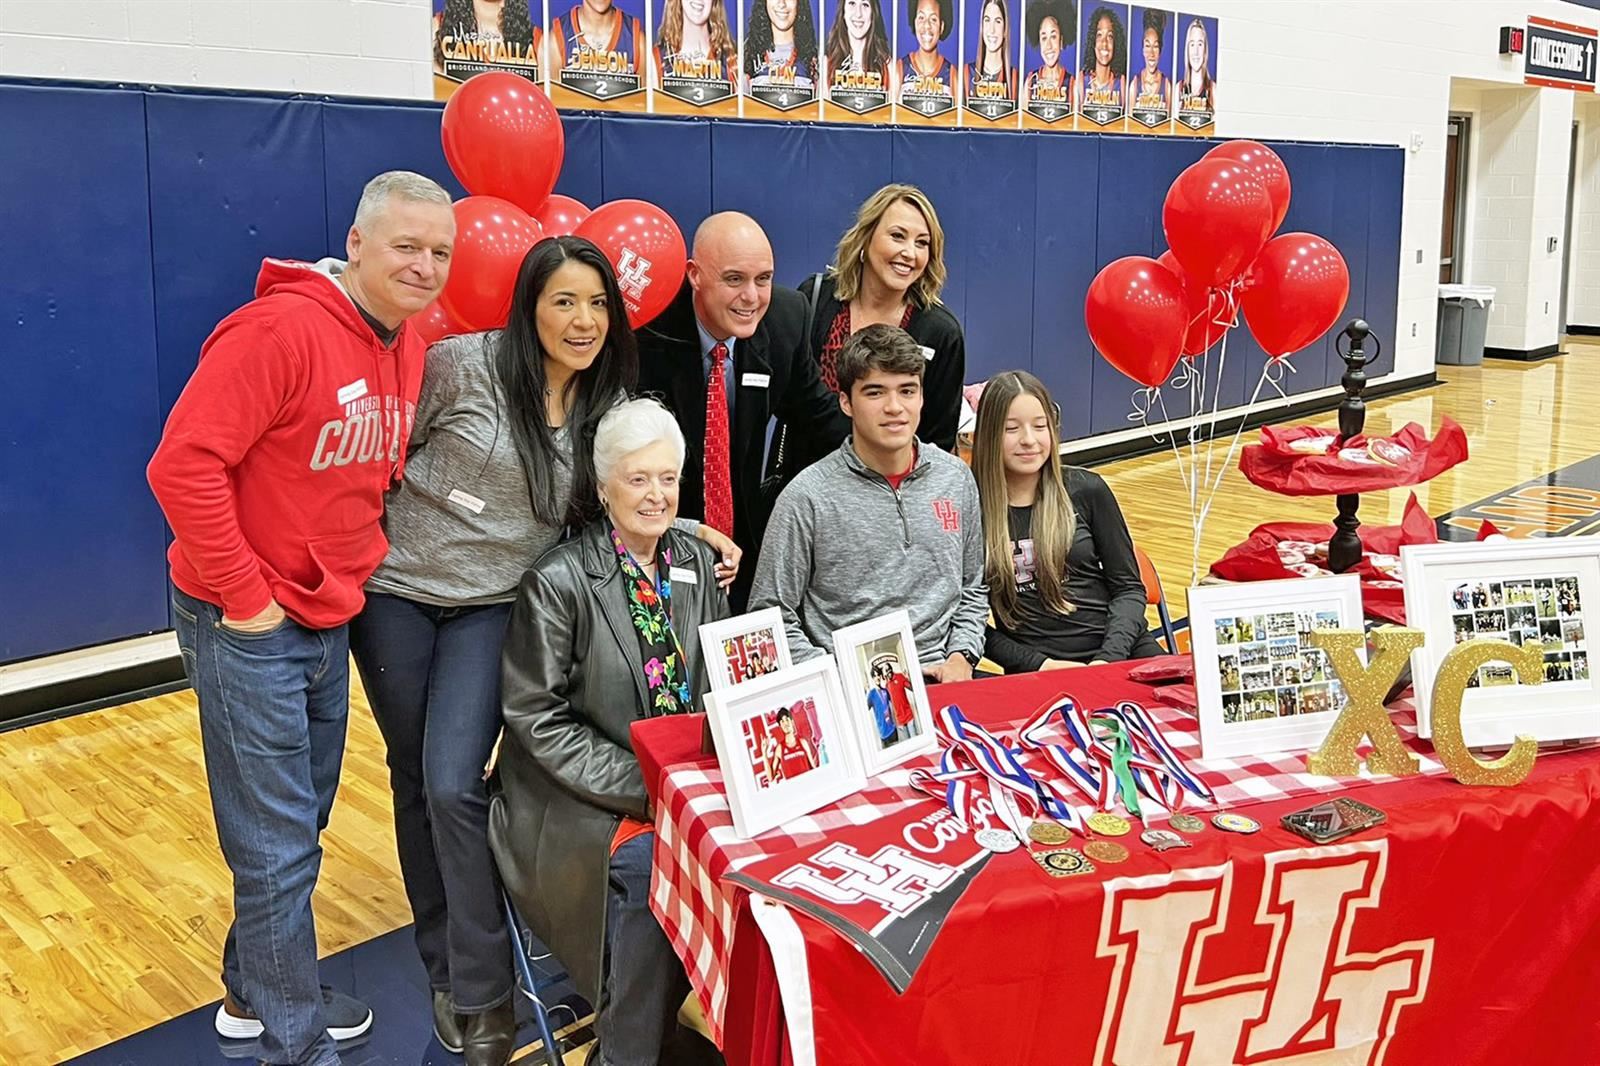 Bridgeland senior Alan Bonner, seated center, poses after signing his letters of intent to the University of Houston.